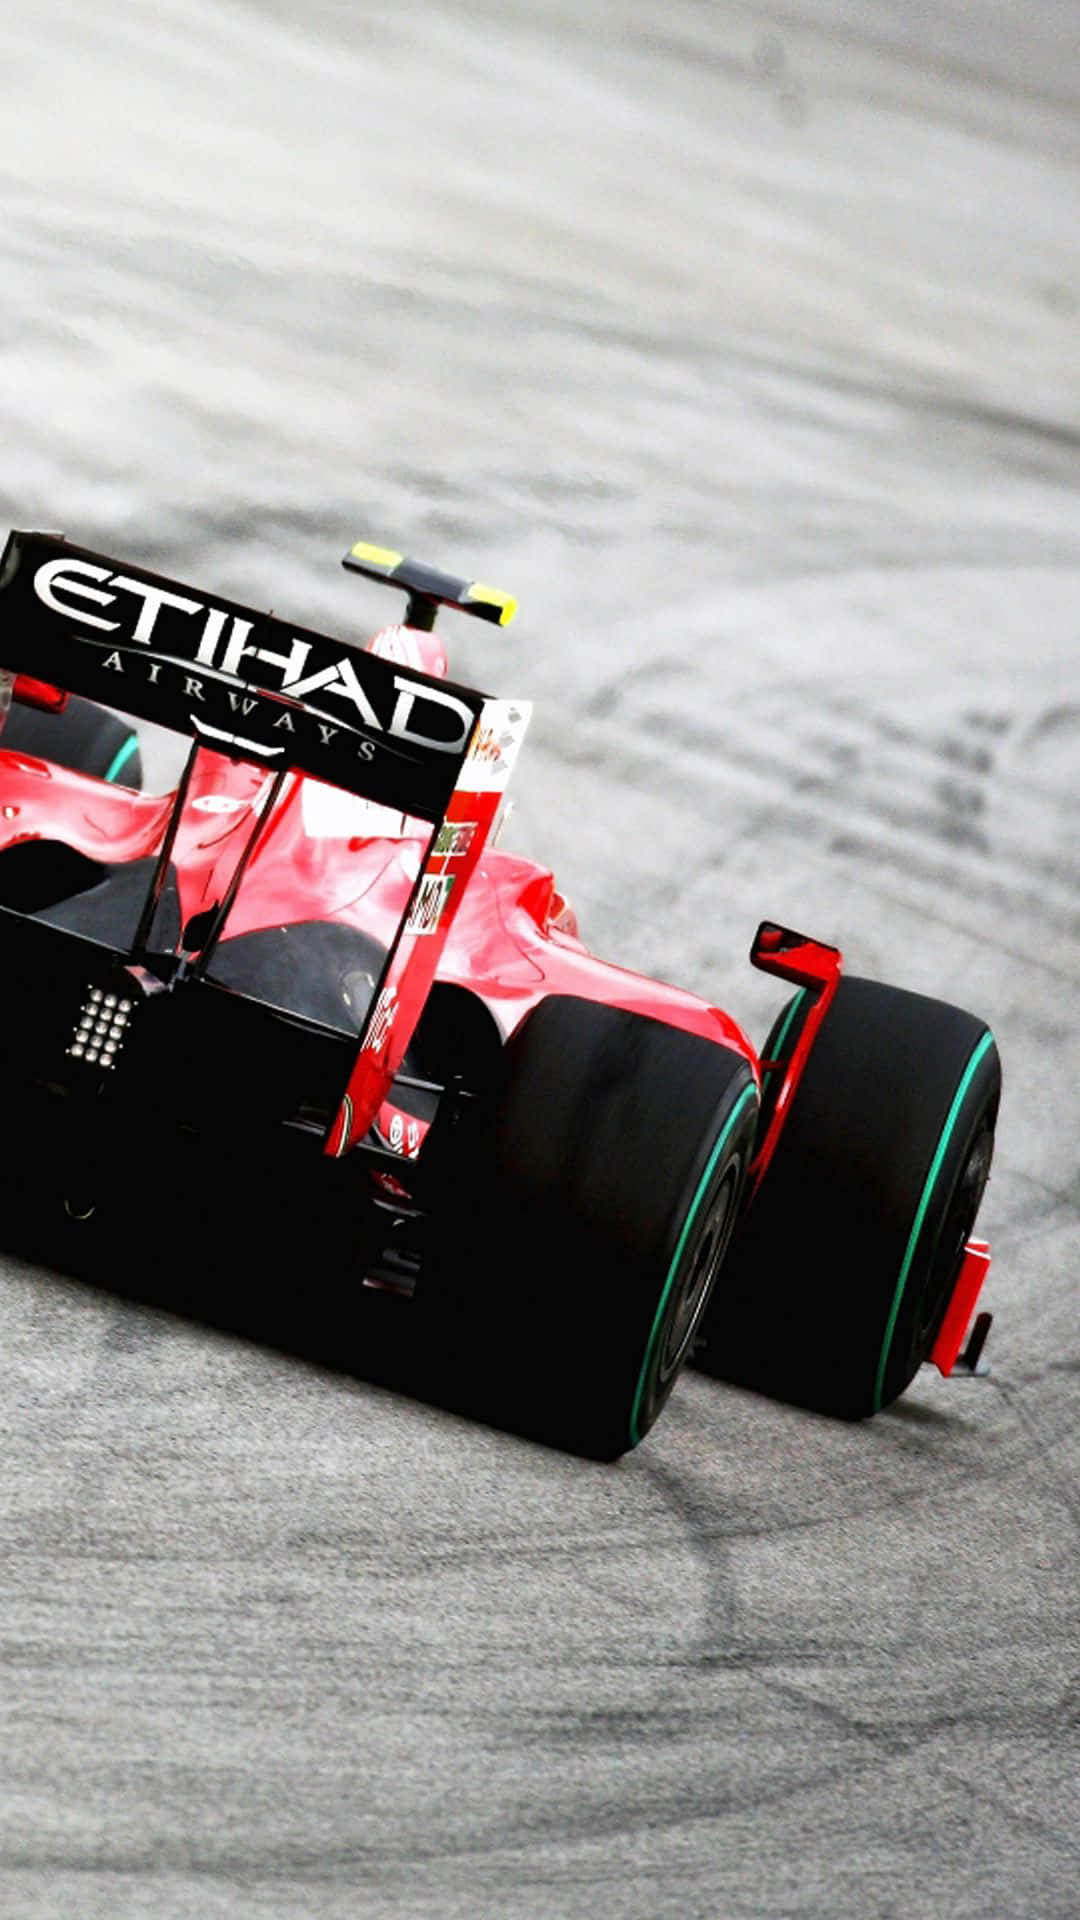 Get Ready for the Next F1 Race with your Iphone Wallpaper